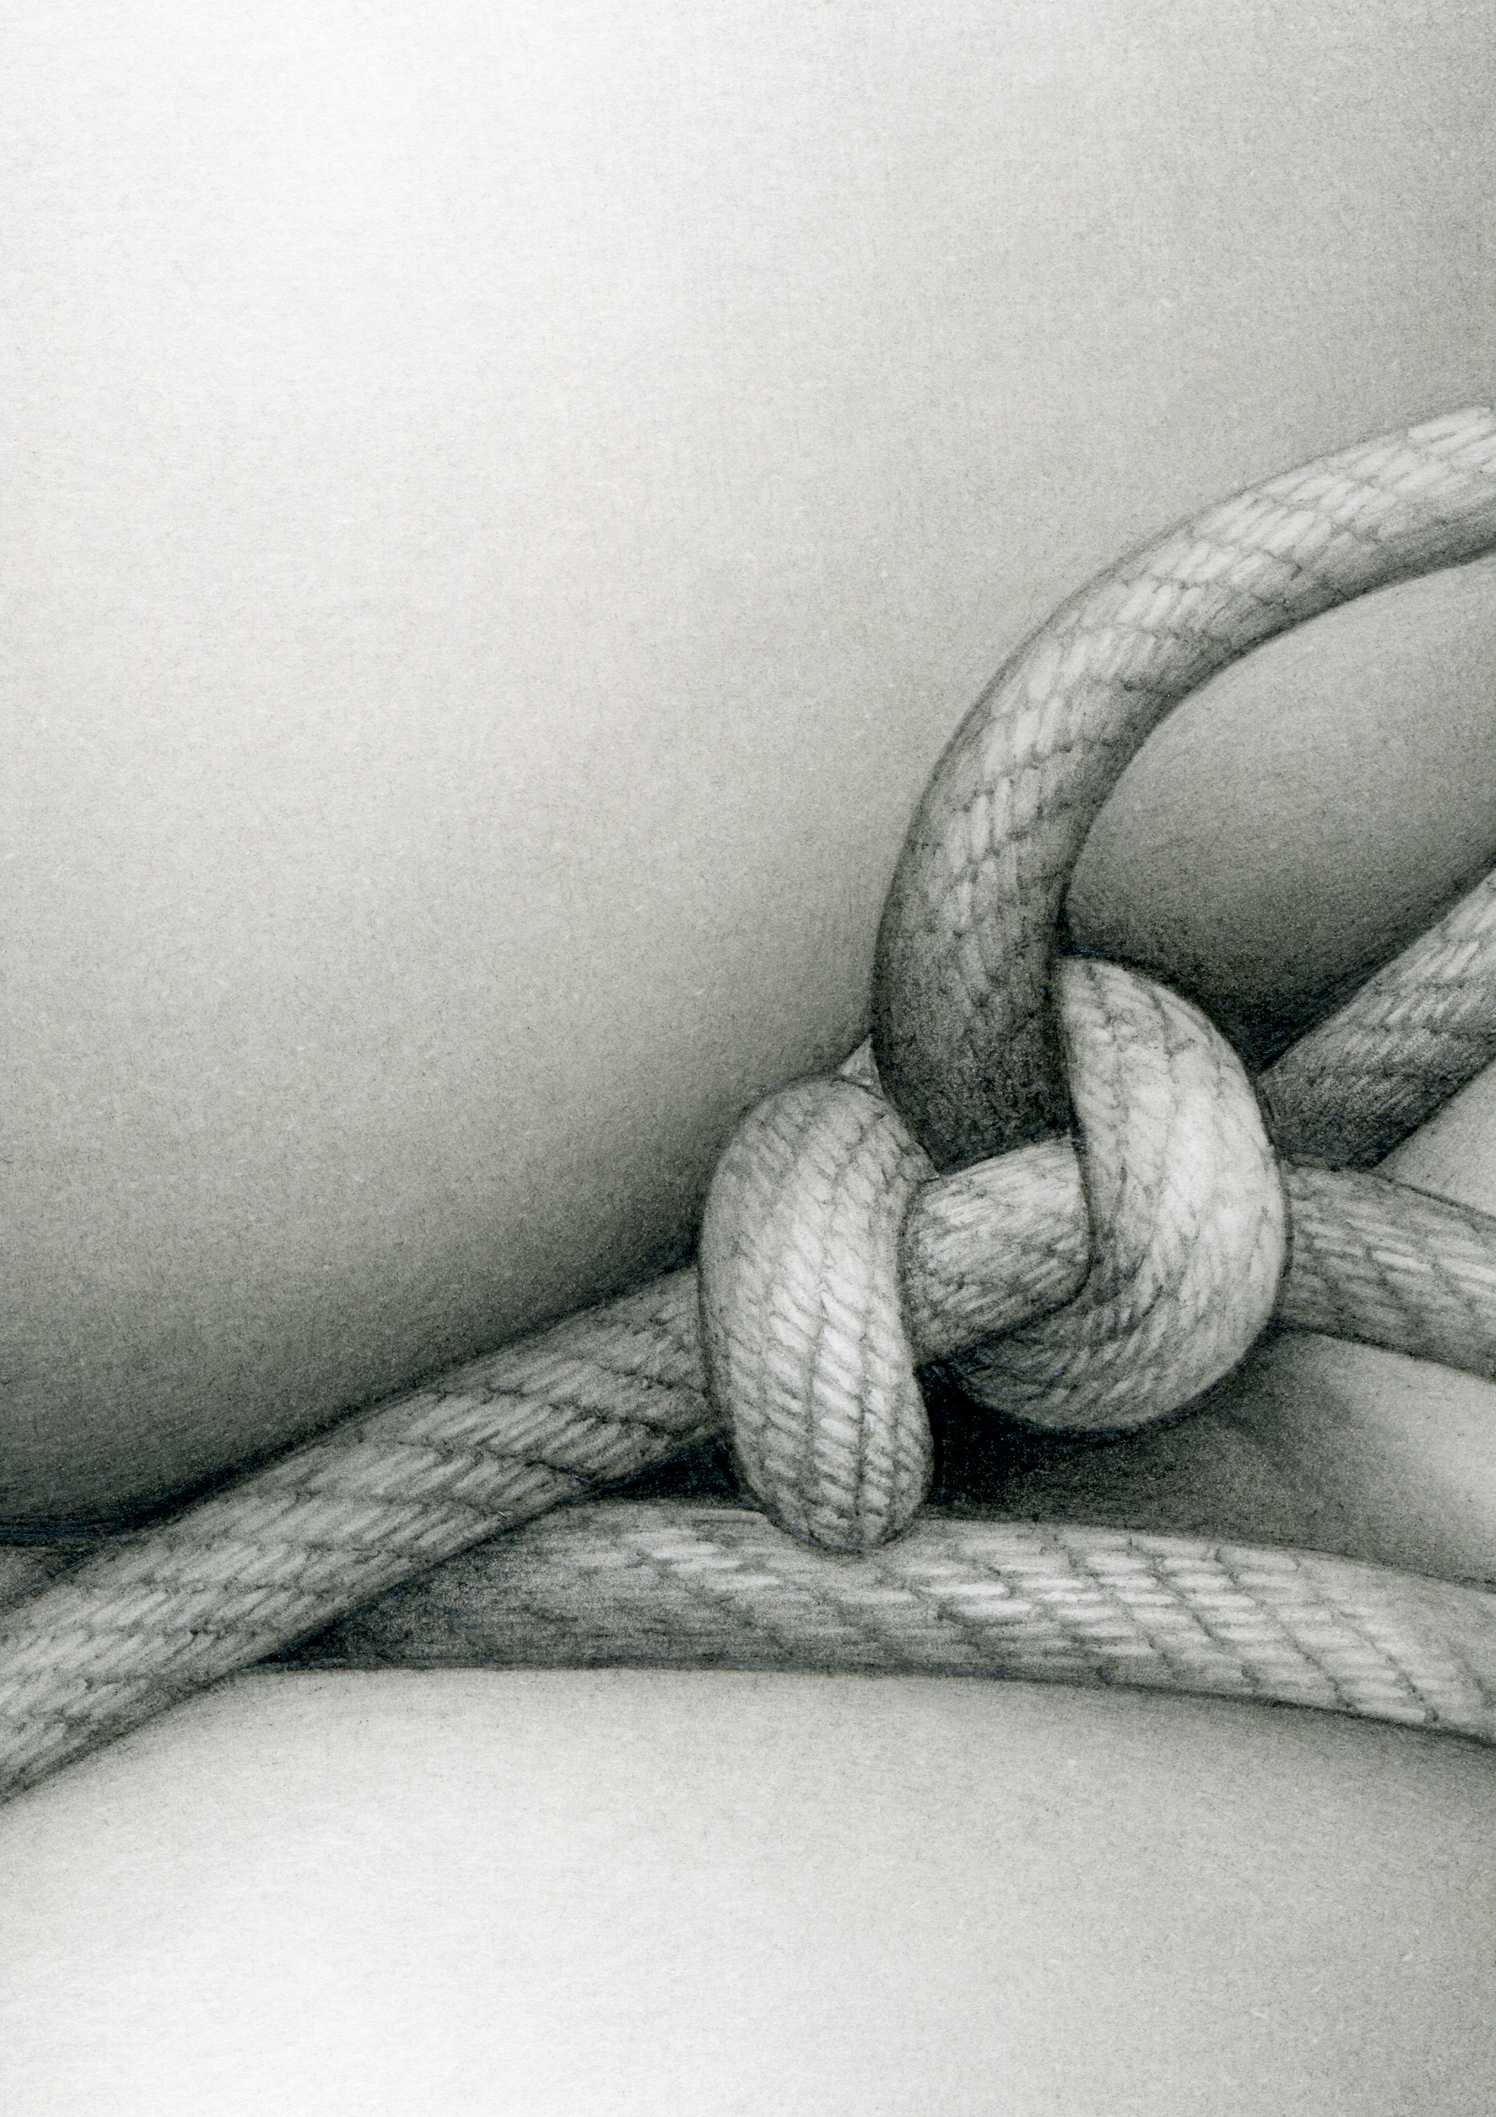 Female Flesh With Knotted Rope